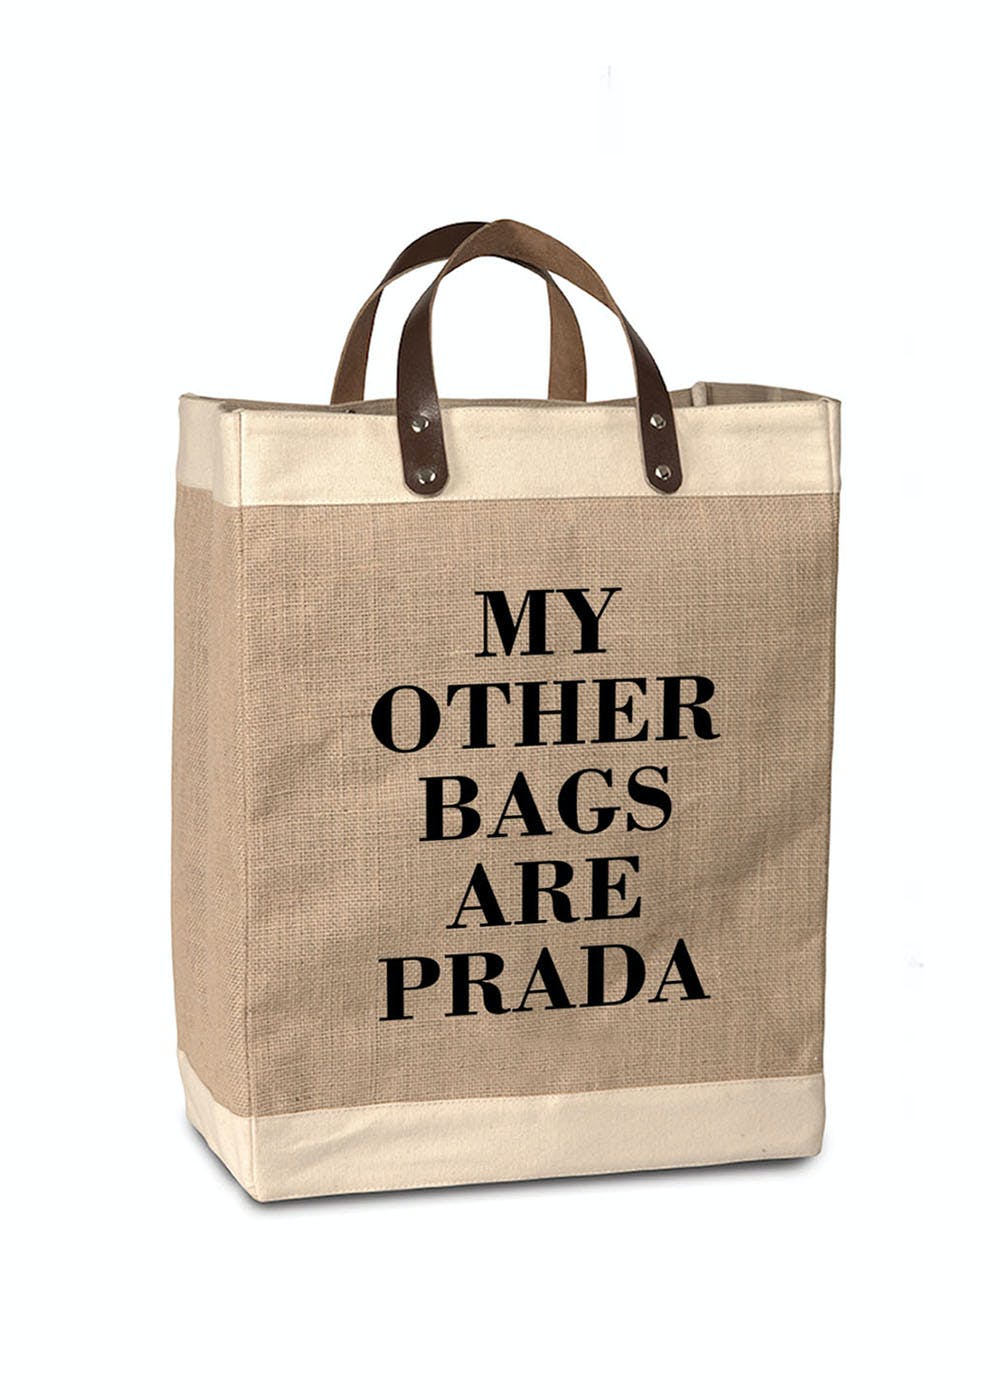 graphic design is my passion - White Tote Bag - Frankly Wearing